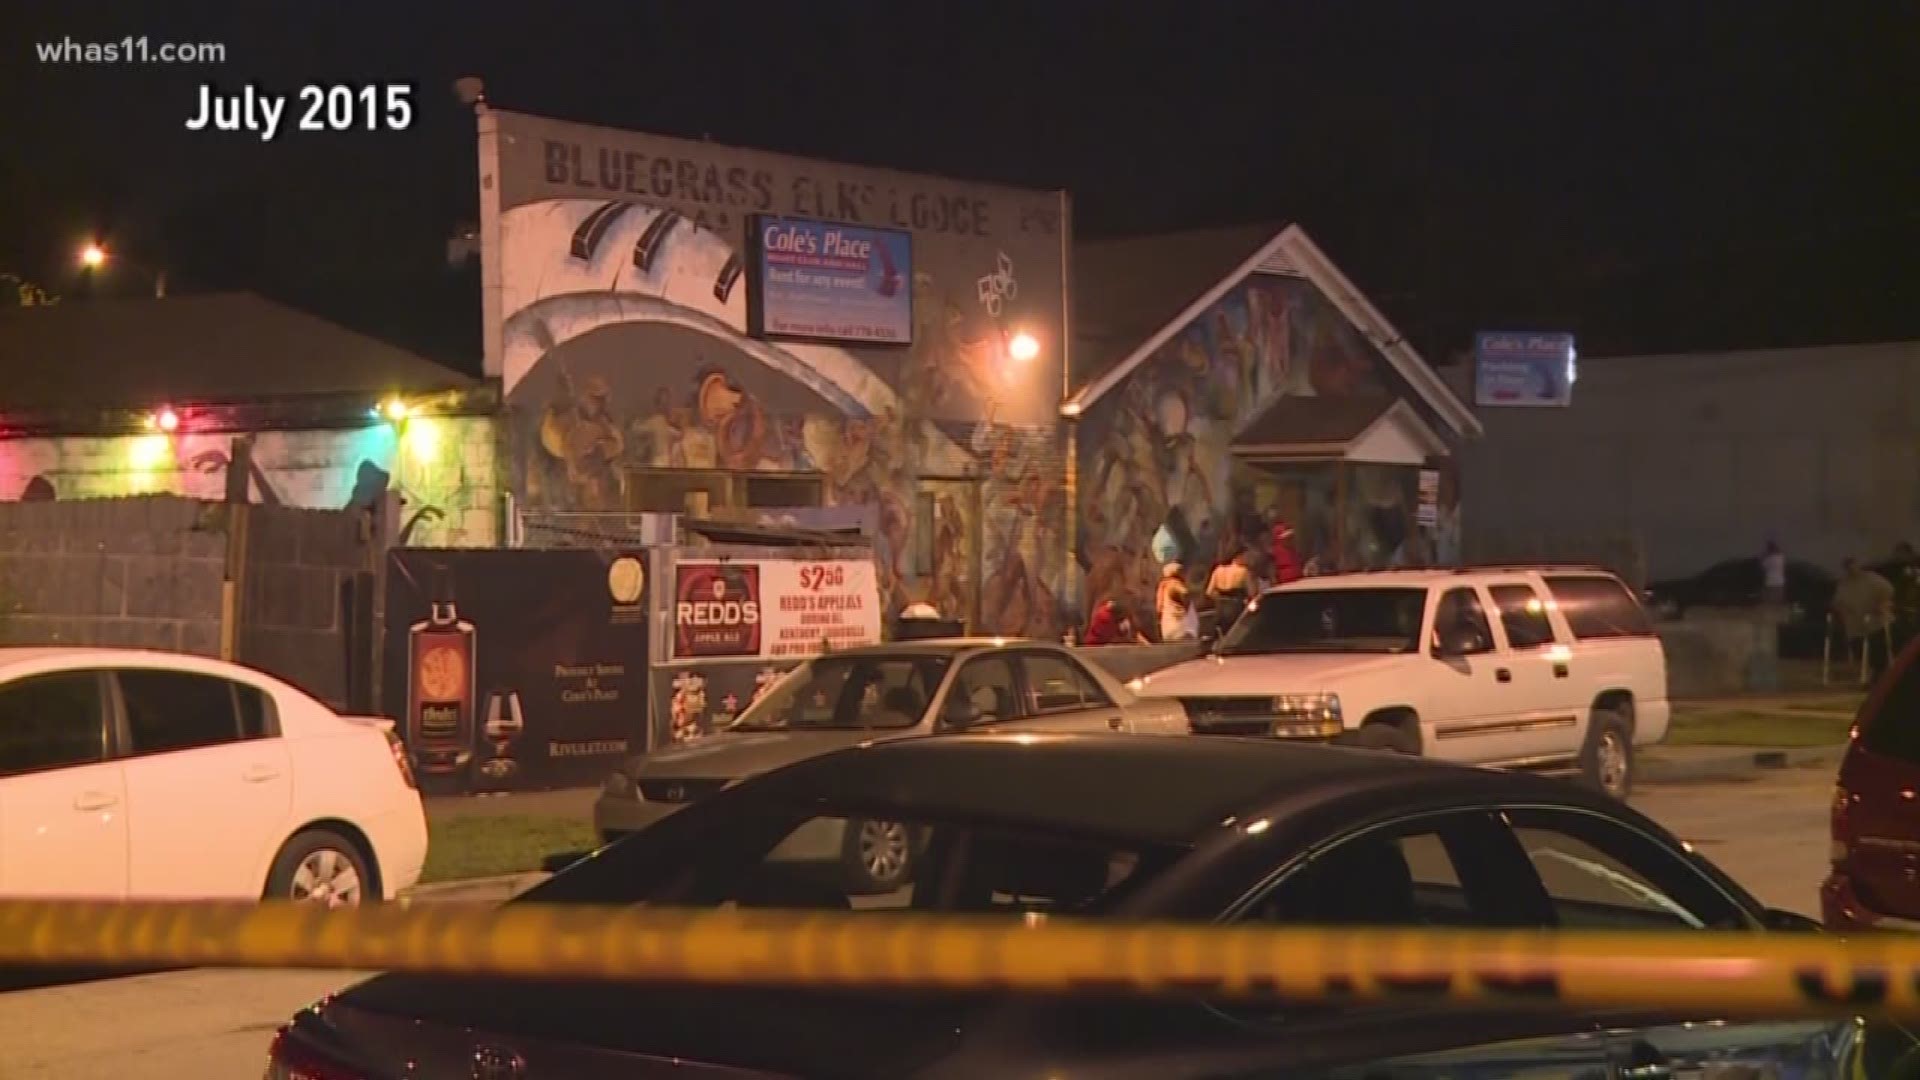 Cole's Place, a popular west Louisville nightclub, is closing its doors after another shooting that injured one person.